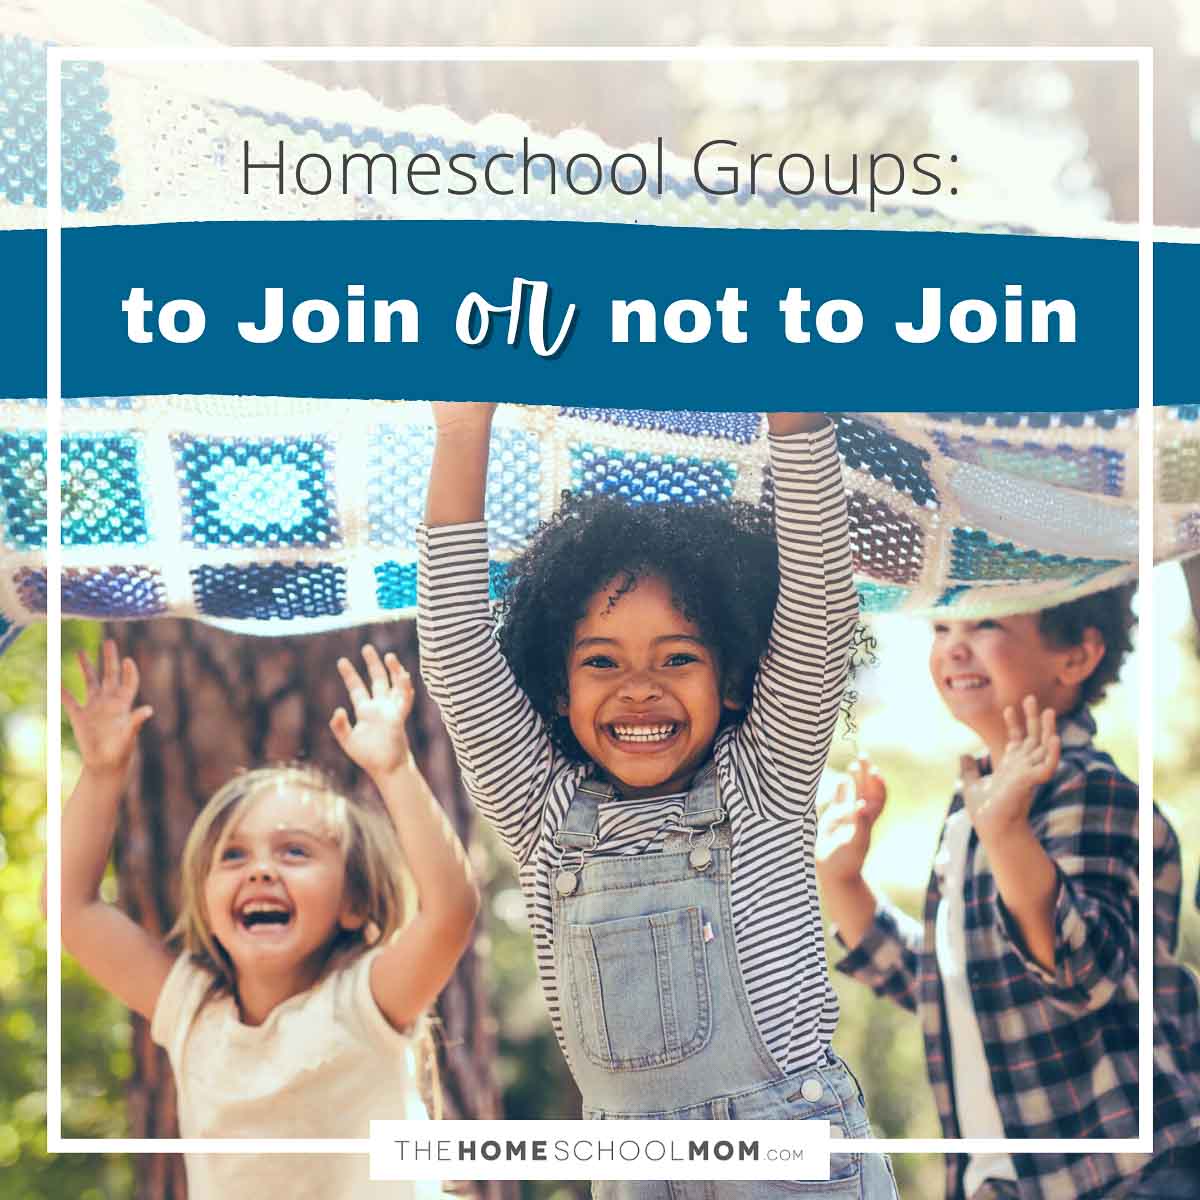 Homeschool Groups: To Join or Not to Join.